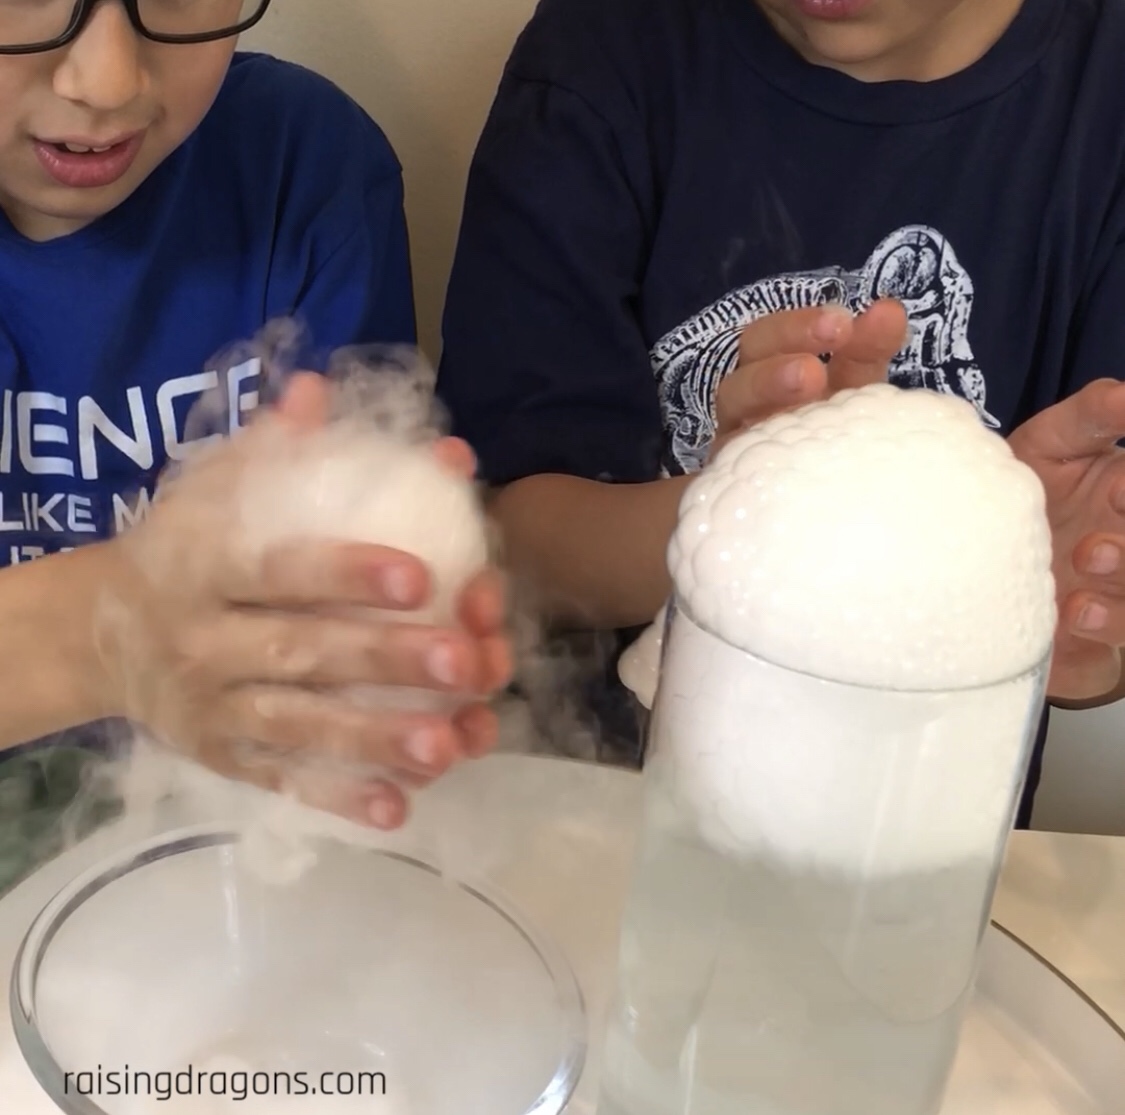 Boo Bubbles Bouncing Smoke - Dry Ice Bubbles Experiment